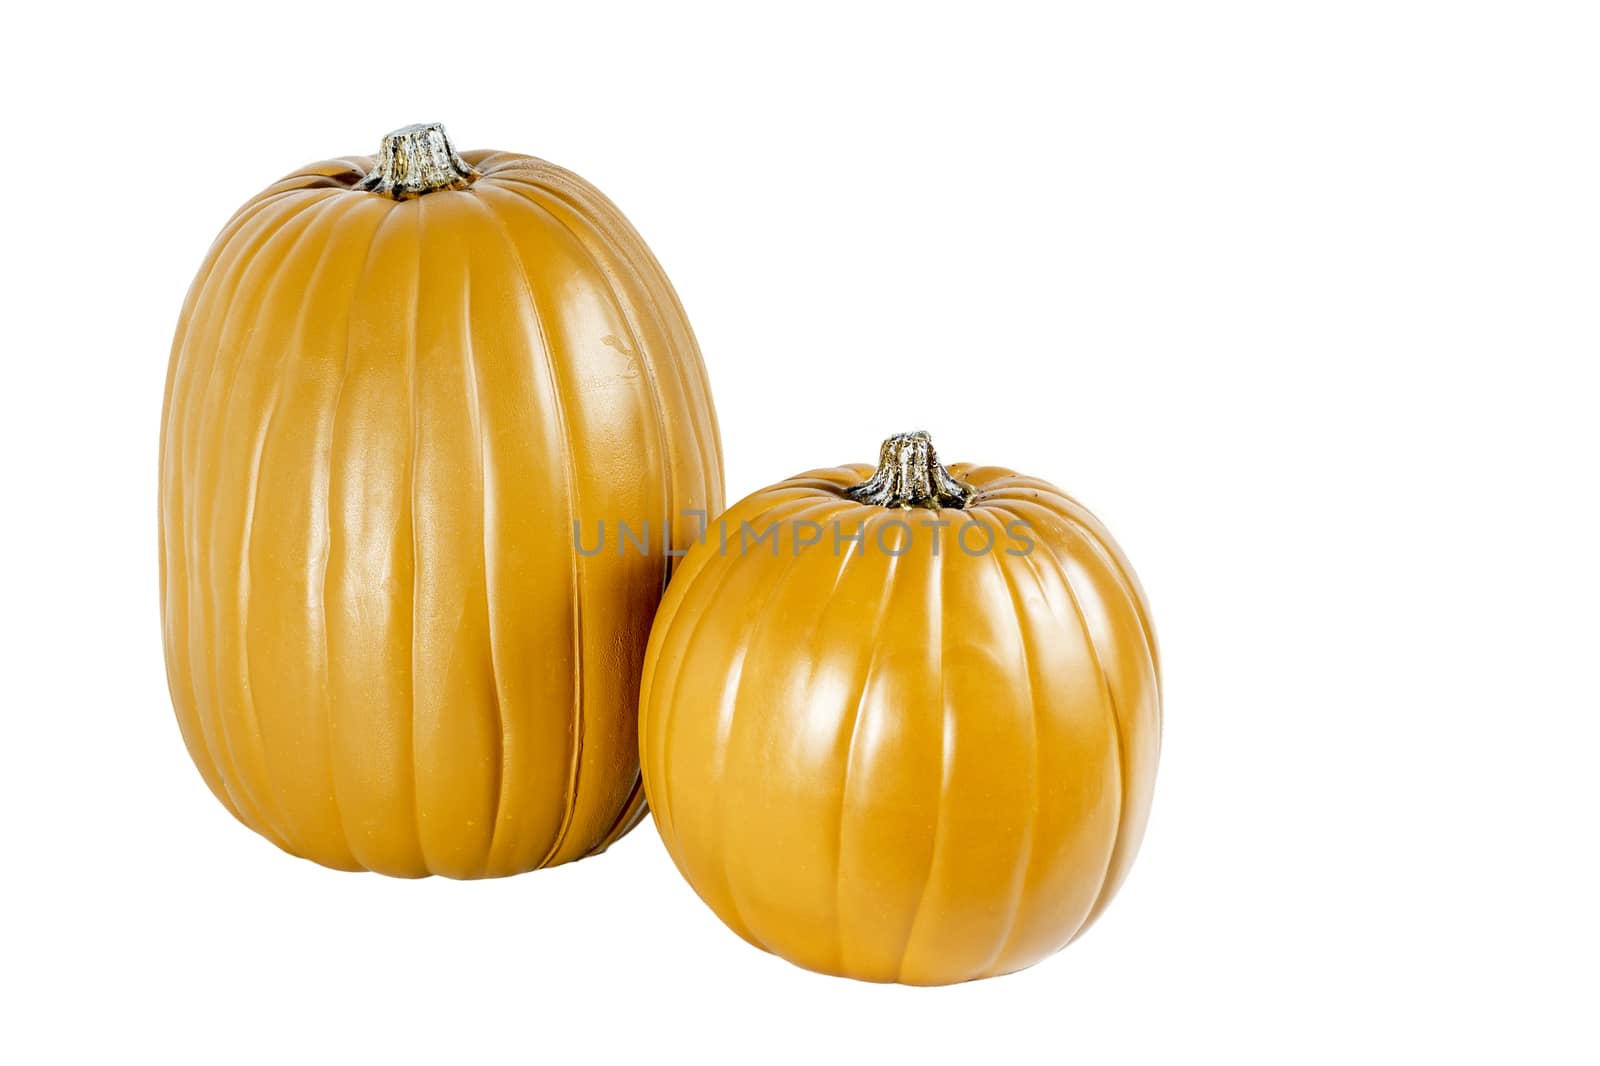 Two isolated pumpkins sitting side by side on a white background.